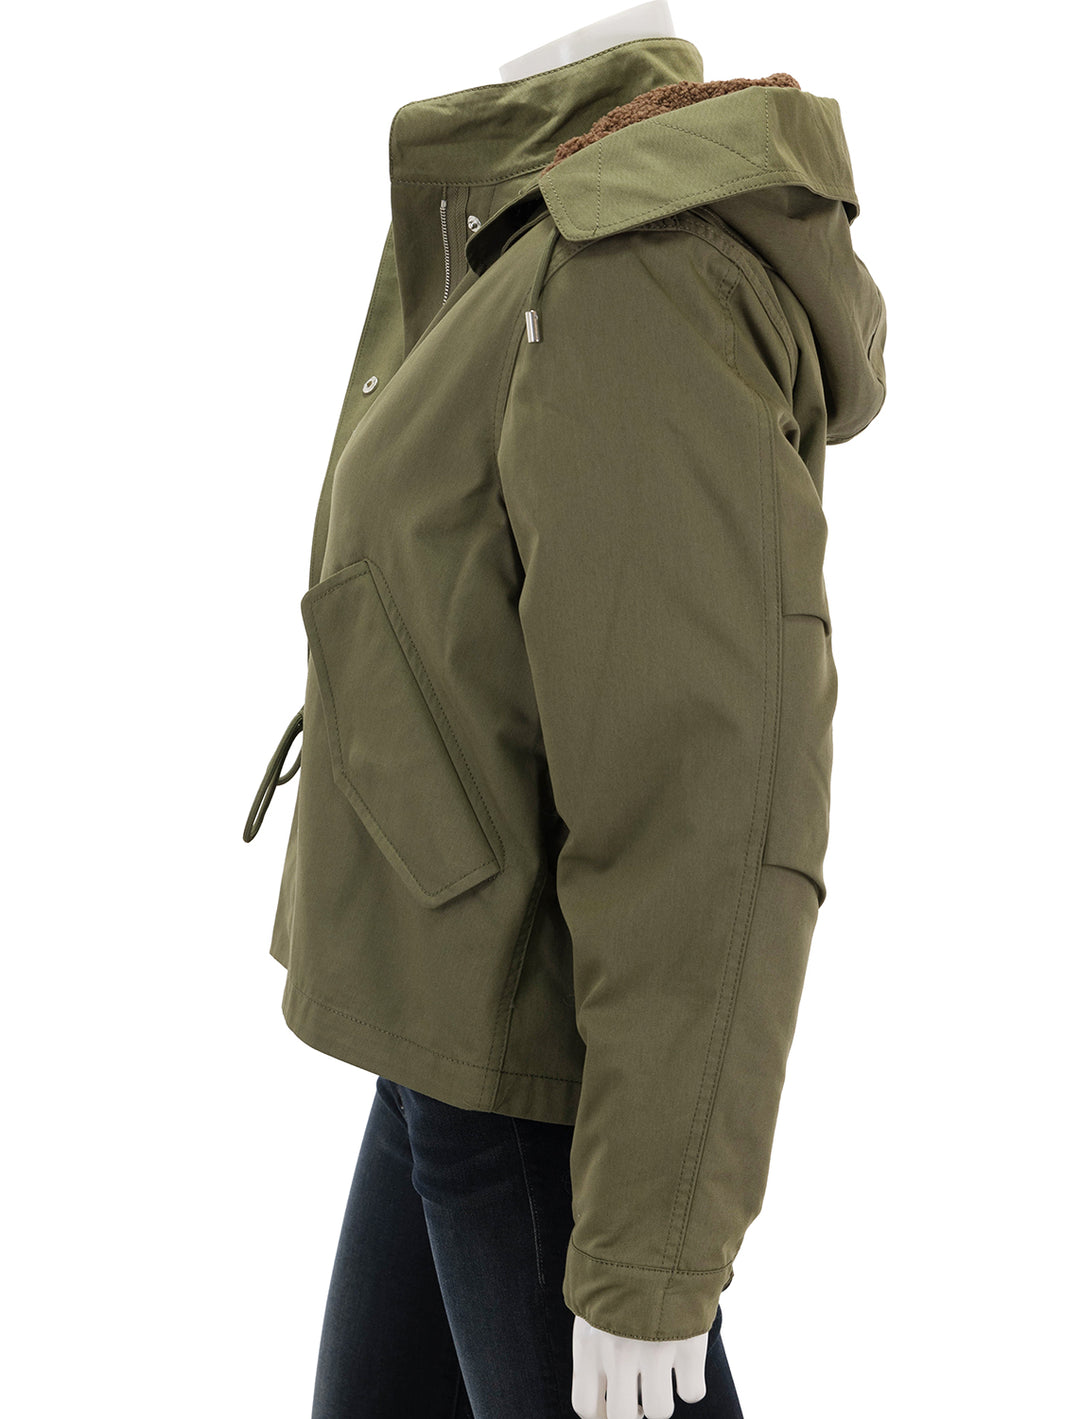 side view of marisa parka coat in army green and chestnut